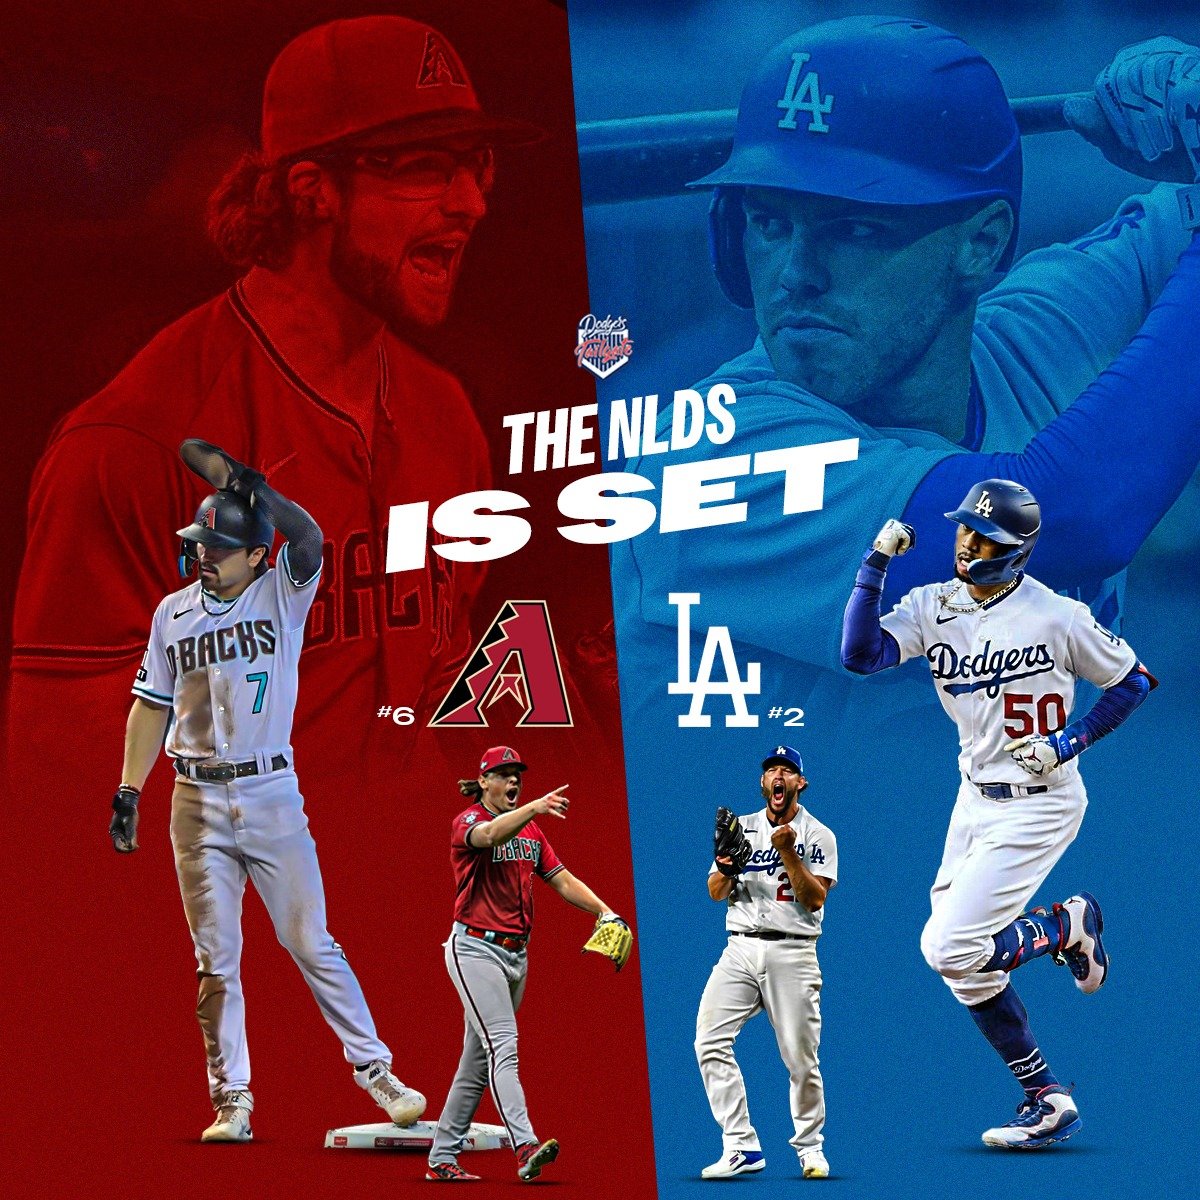 It will be #EmbraceTheChaos vs. #LetsGoDodgers in the NLDS! #Postseason